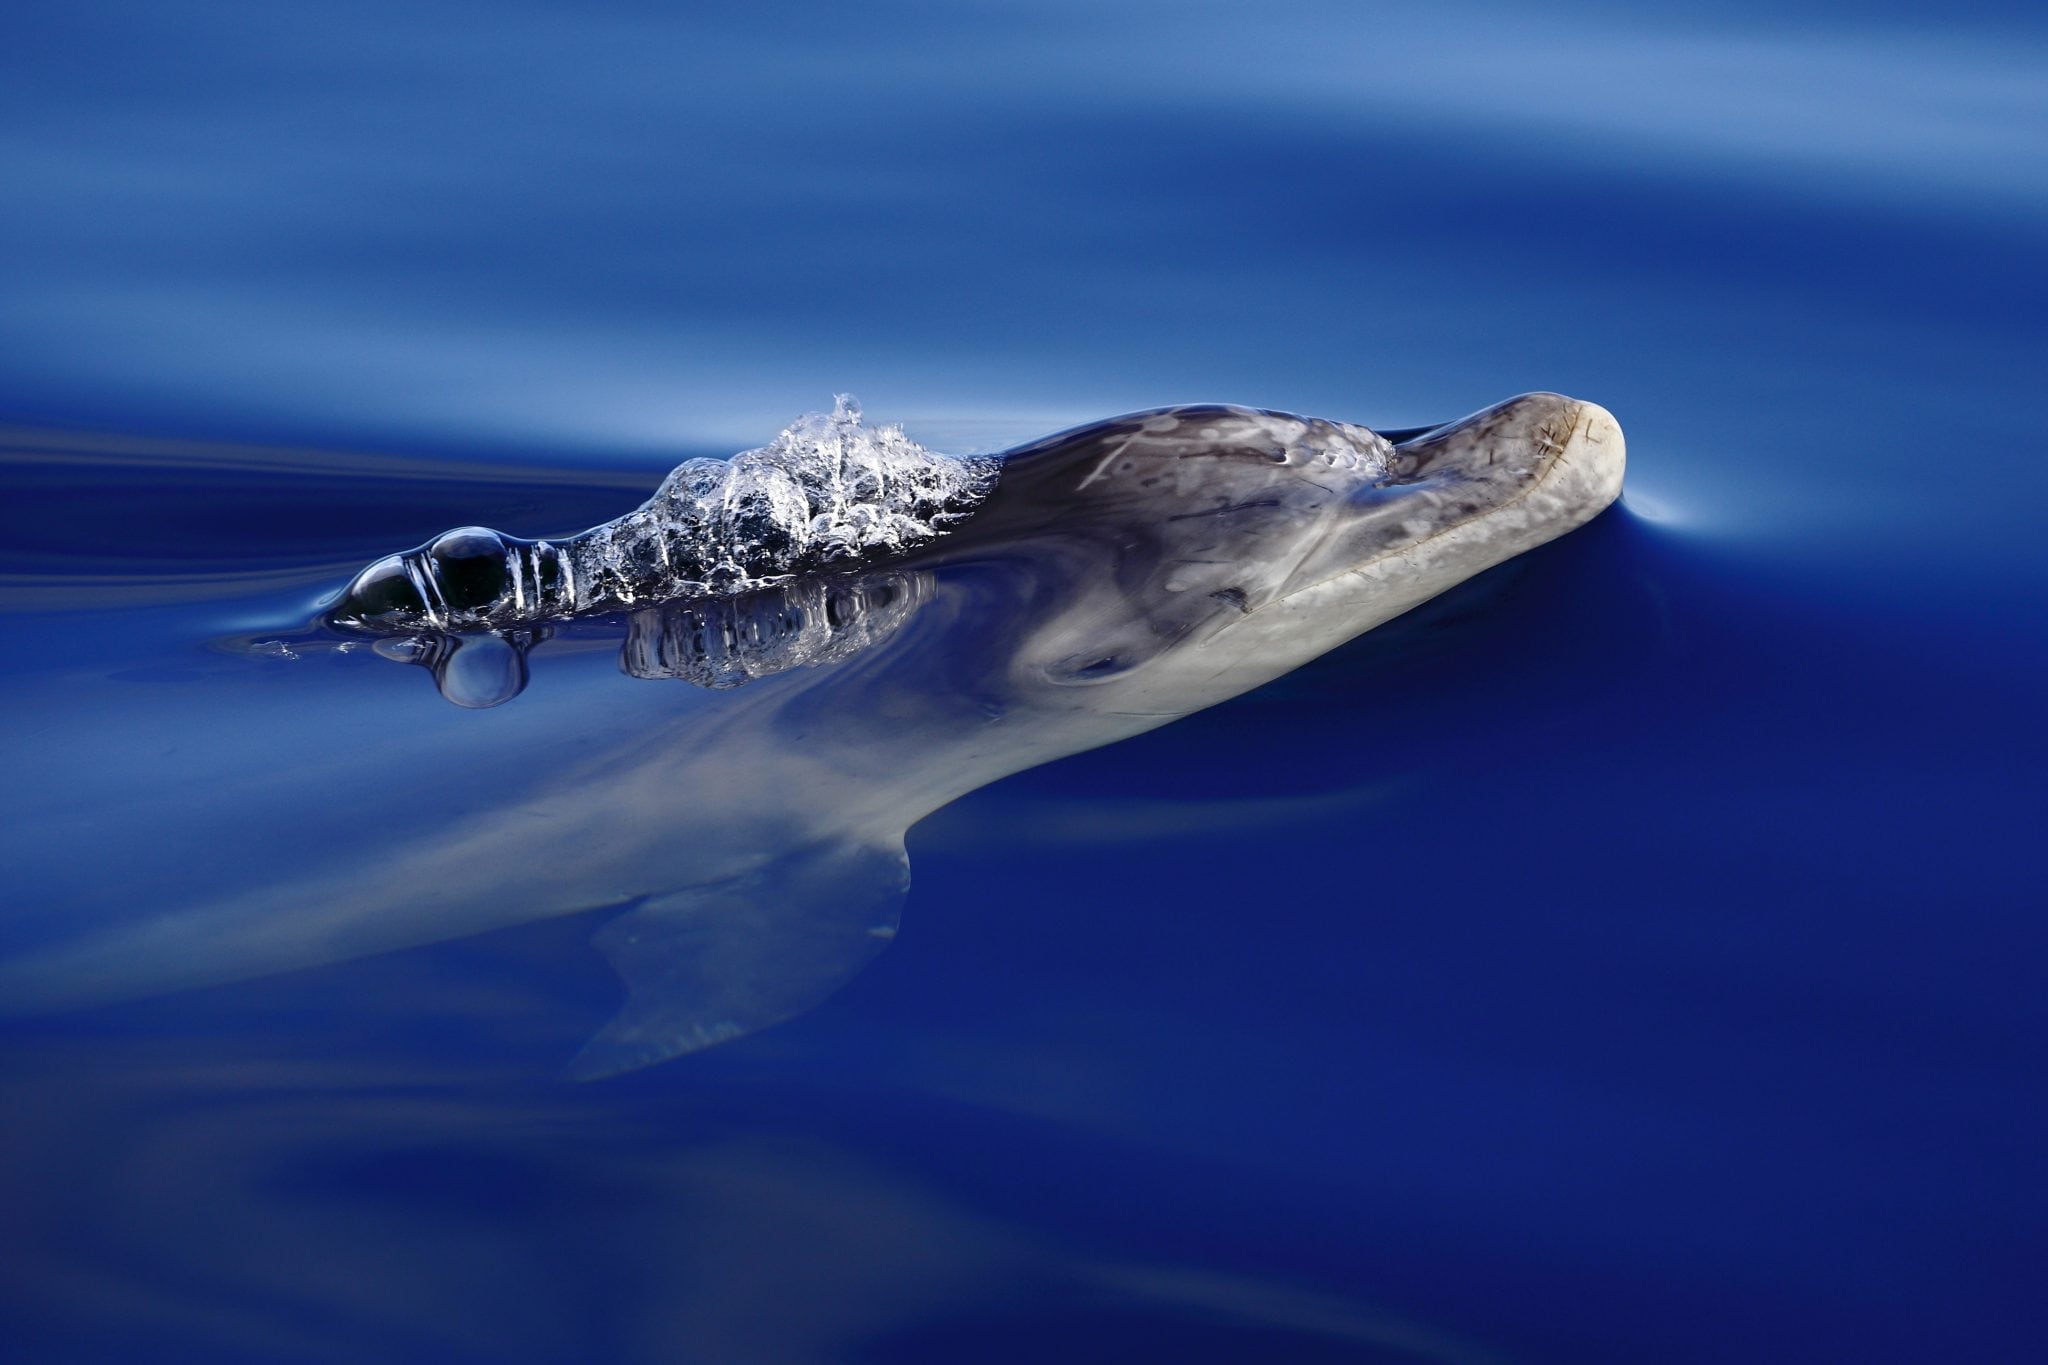 Dolphin facts and information - Whale & Dolphin Conservation USA